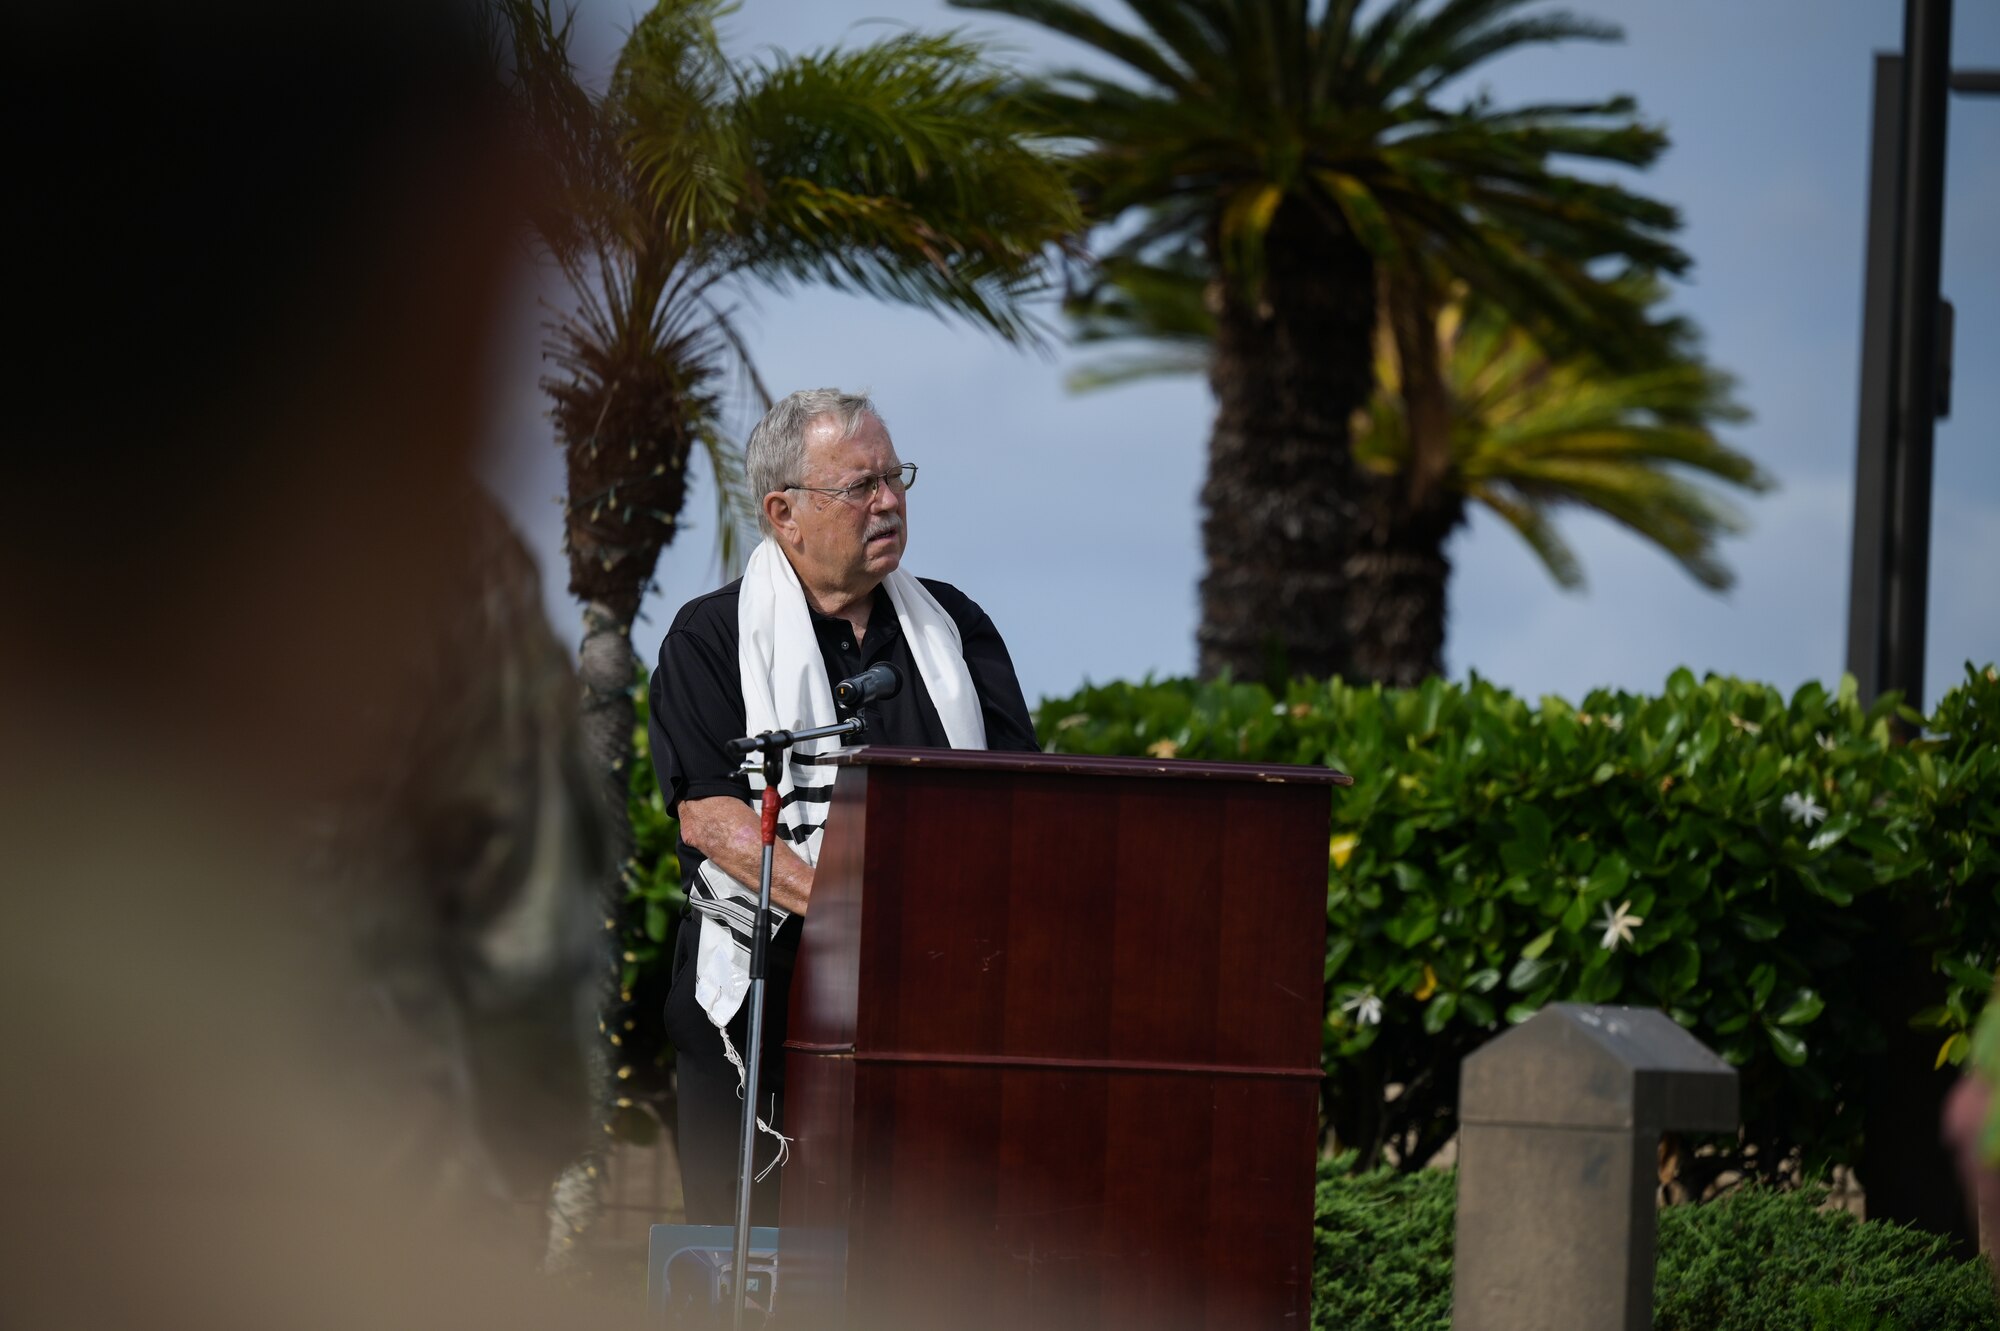 Daniel Bender, a leader at the Lay Aloha Jewish Chapel, speaks during a Holocaust Remembrance Ceremony at the Missing Man Monument on Joint Base Pearl Harbor-Hickam, Hawaii, April 18, 2023. The ceremony was held in commemoration of Holocaust Remembrance Week. (U.S. Air Force photo by Staff Sgt. Alan Ricker)